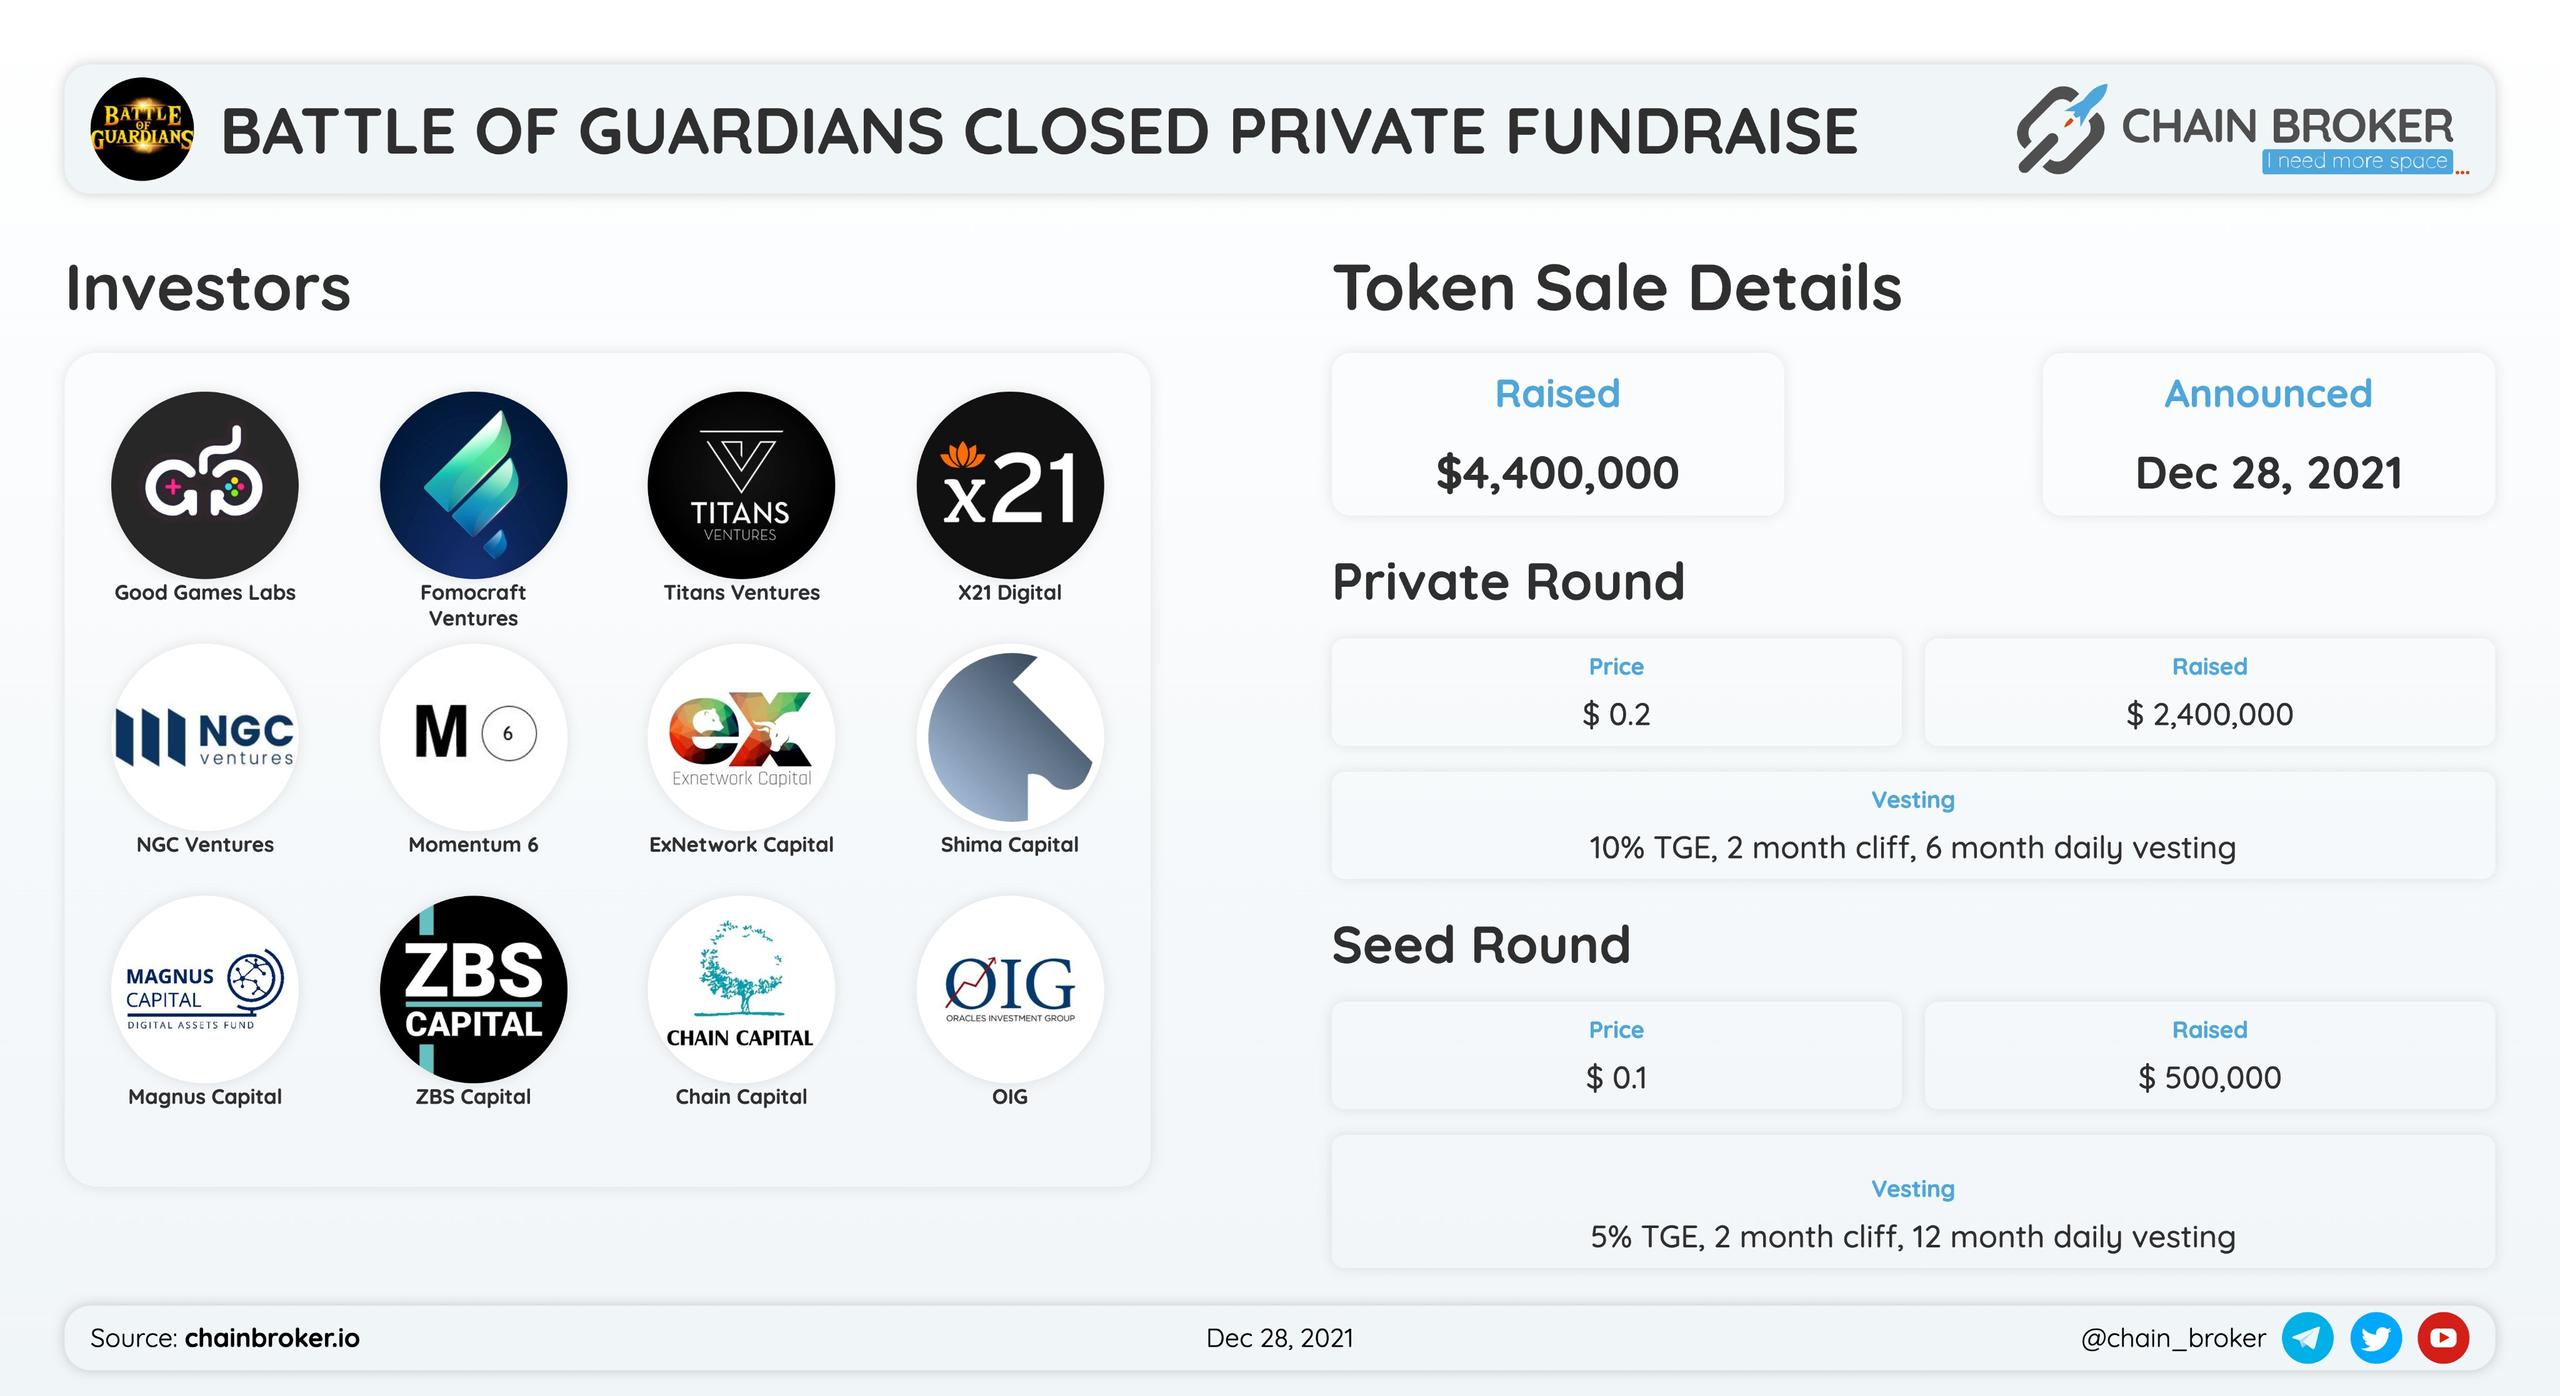 Battle of Guardians $BGS has closed $4.4M Seed/Private Round.